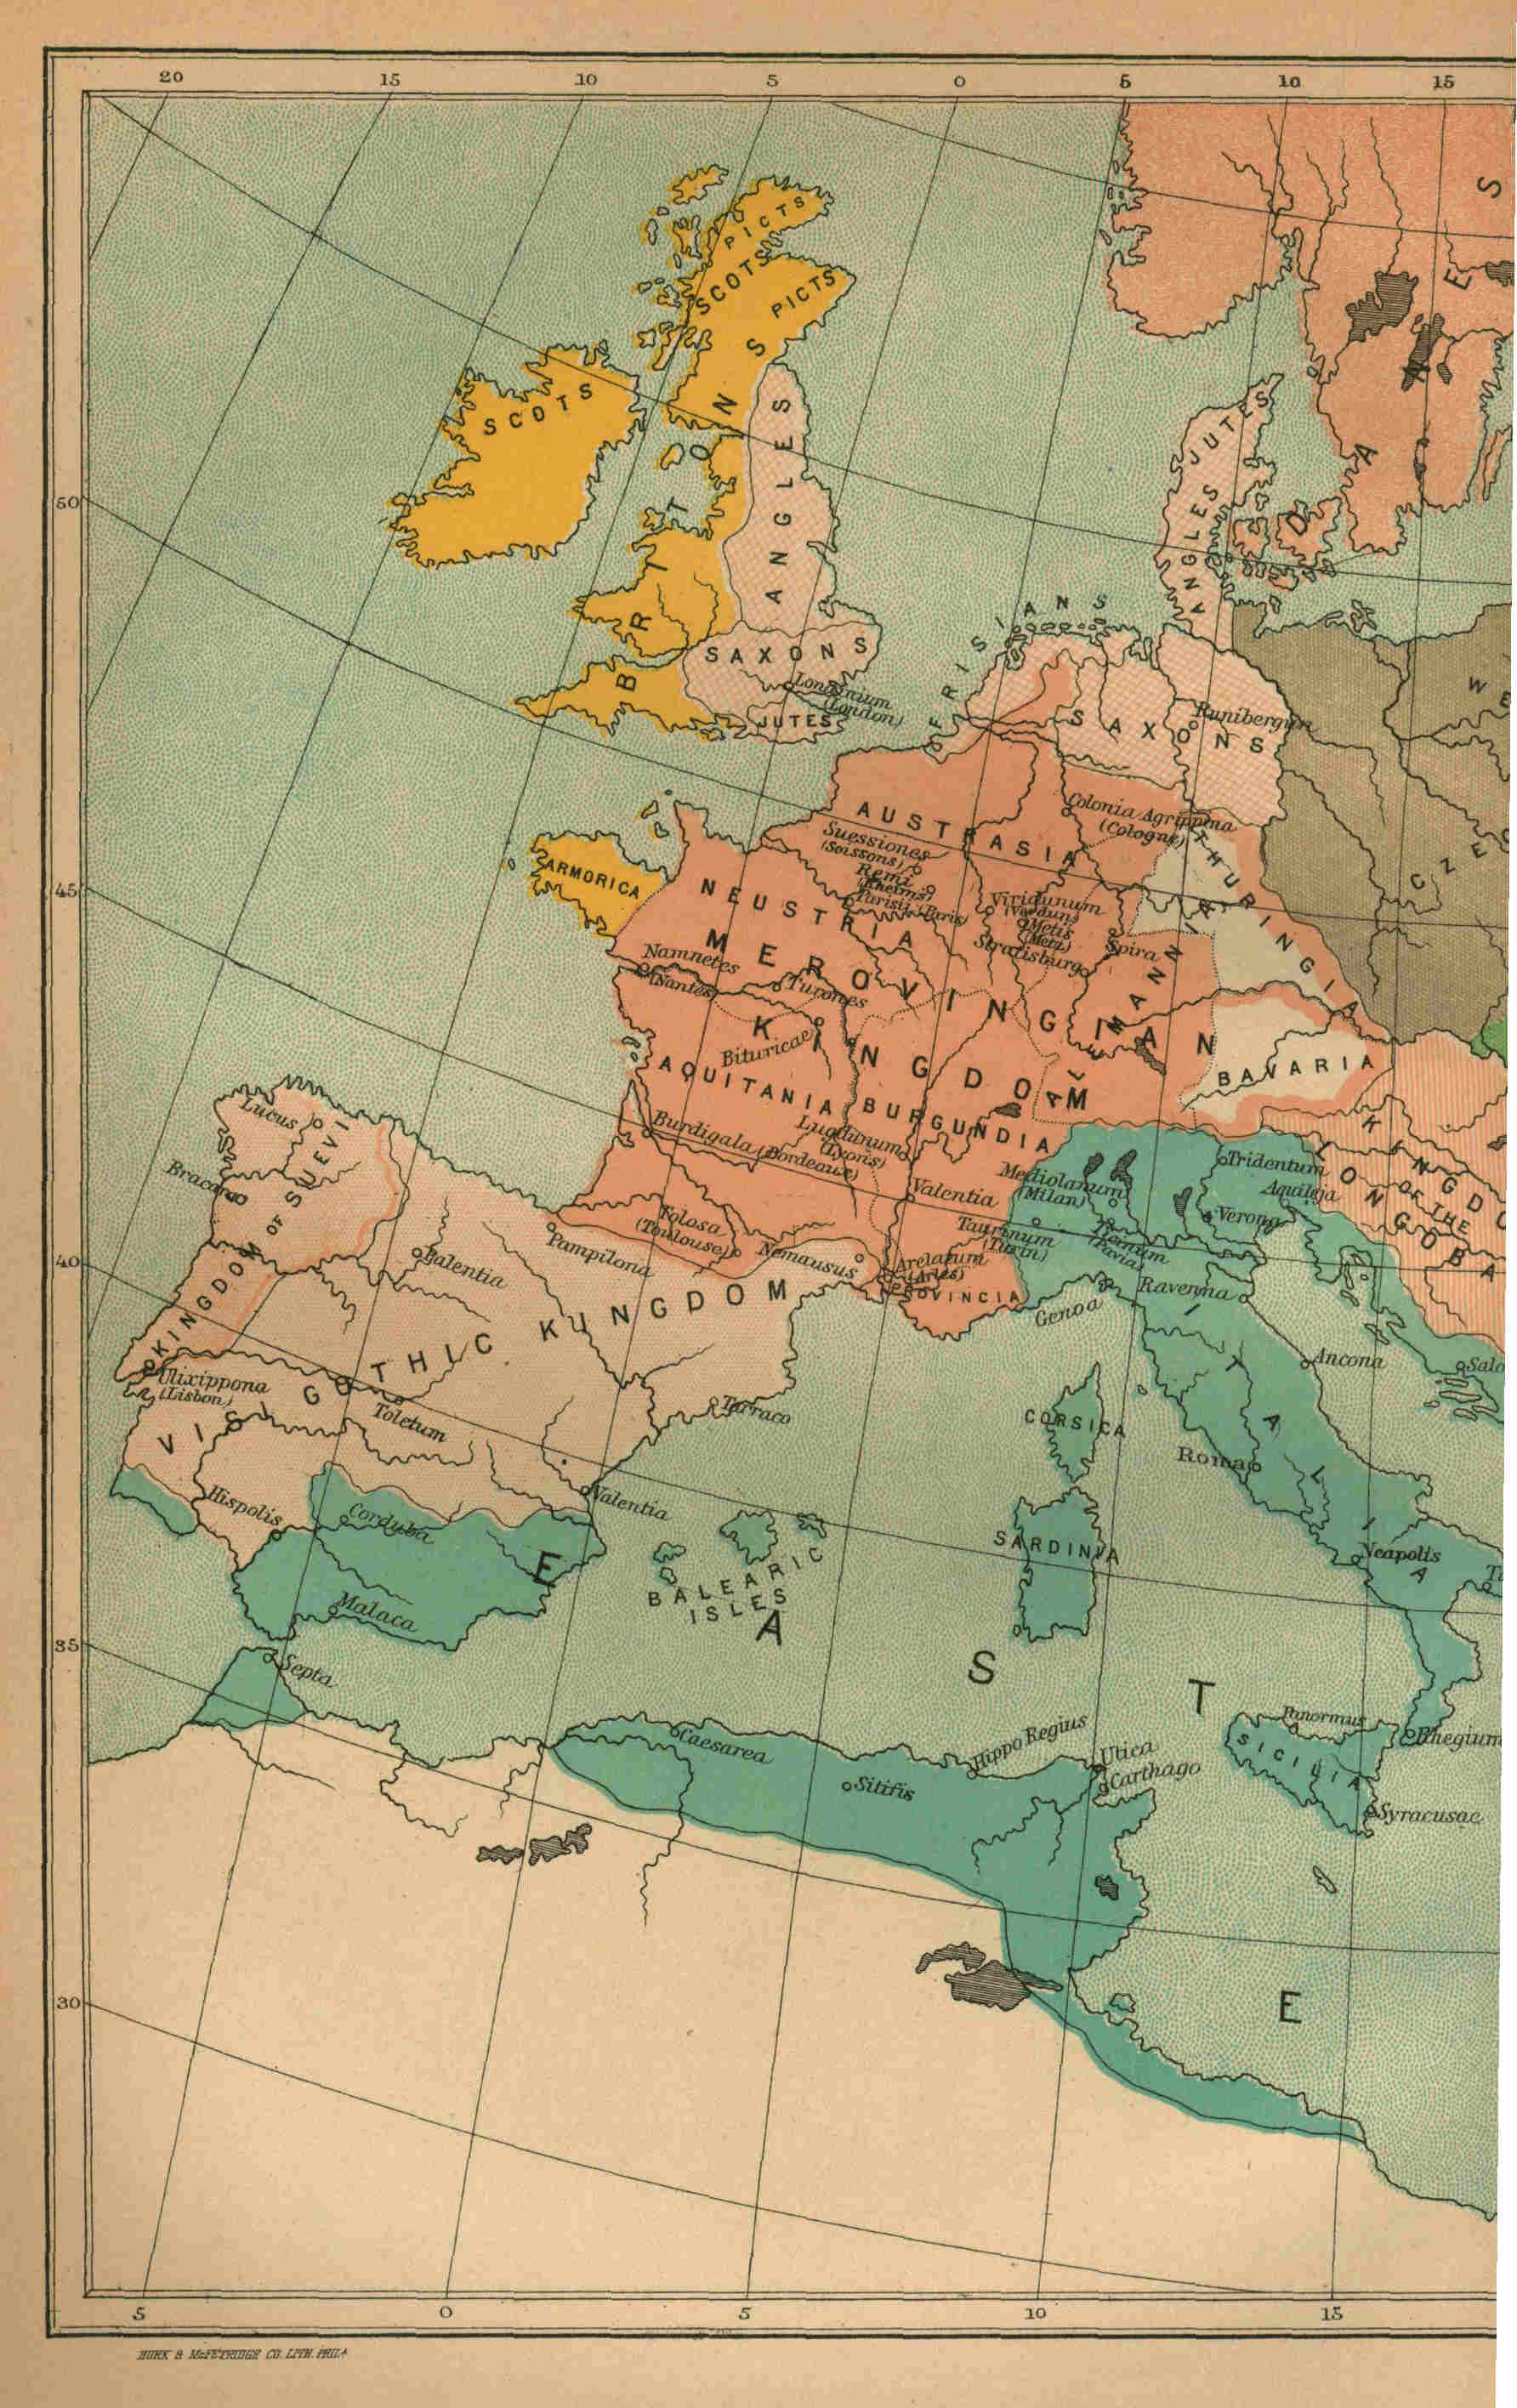 EUROPE AT 565 A. D.